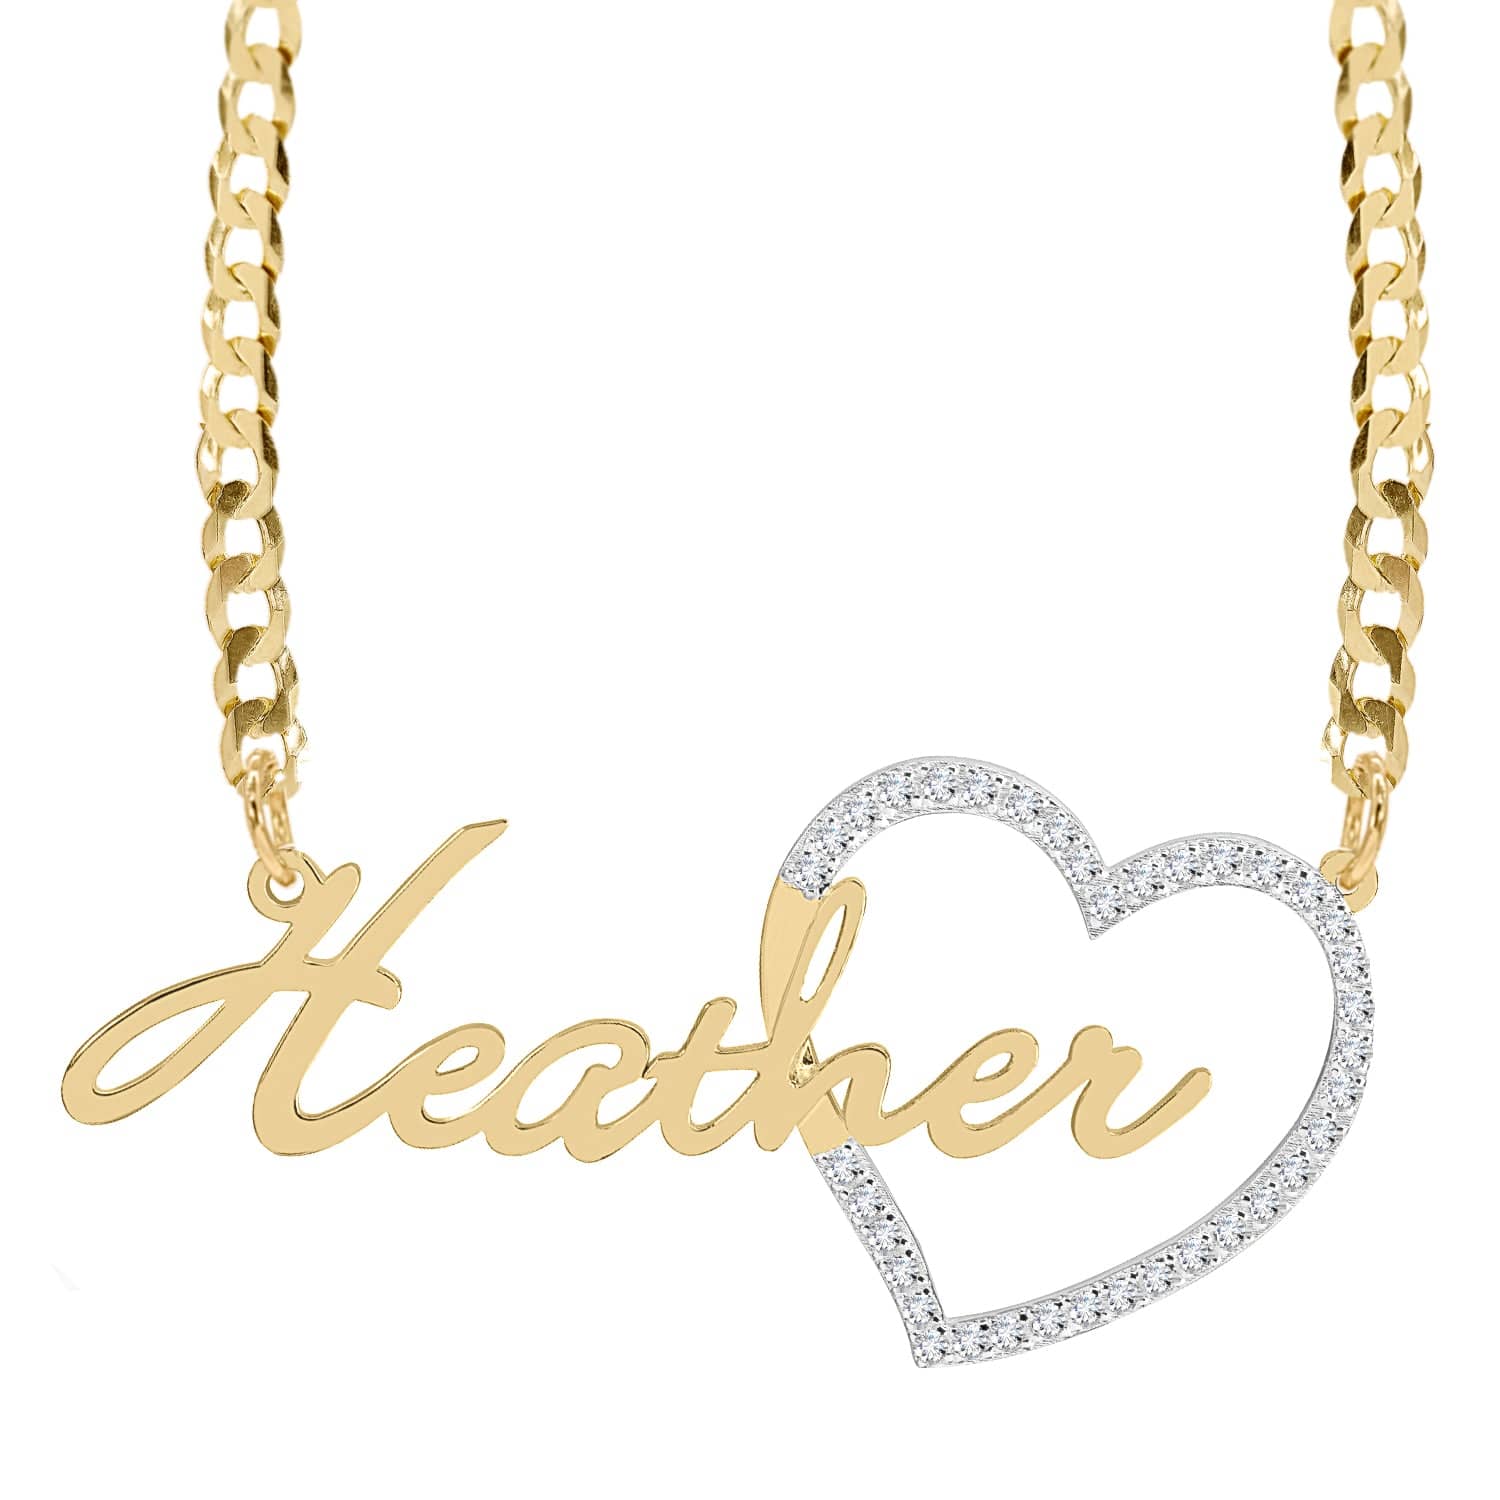 14k Gold over Sterling Silver / Link Chain Single Plated Nameplate Necklace "Heather" with Stones Heart